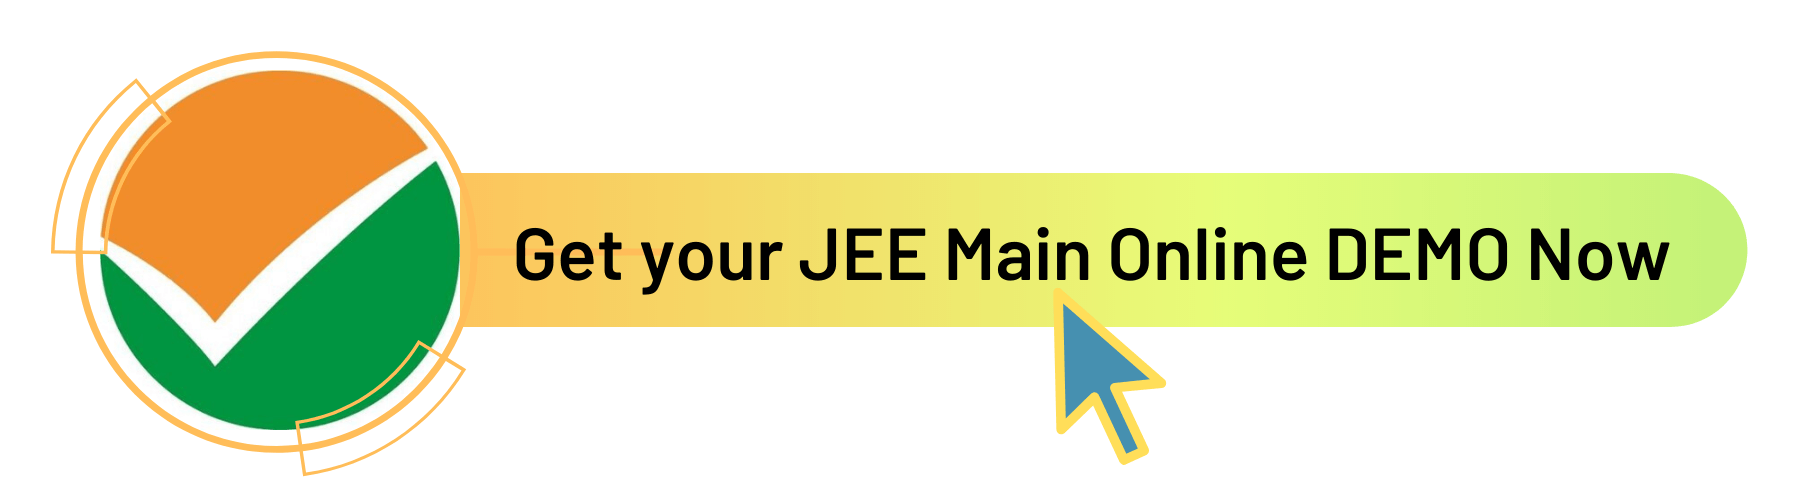 JEE Main Online Course Demo